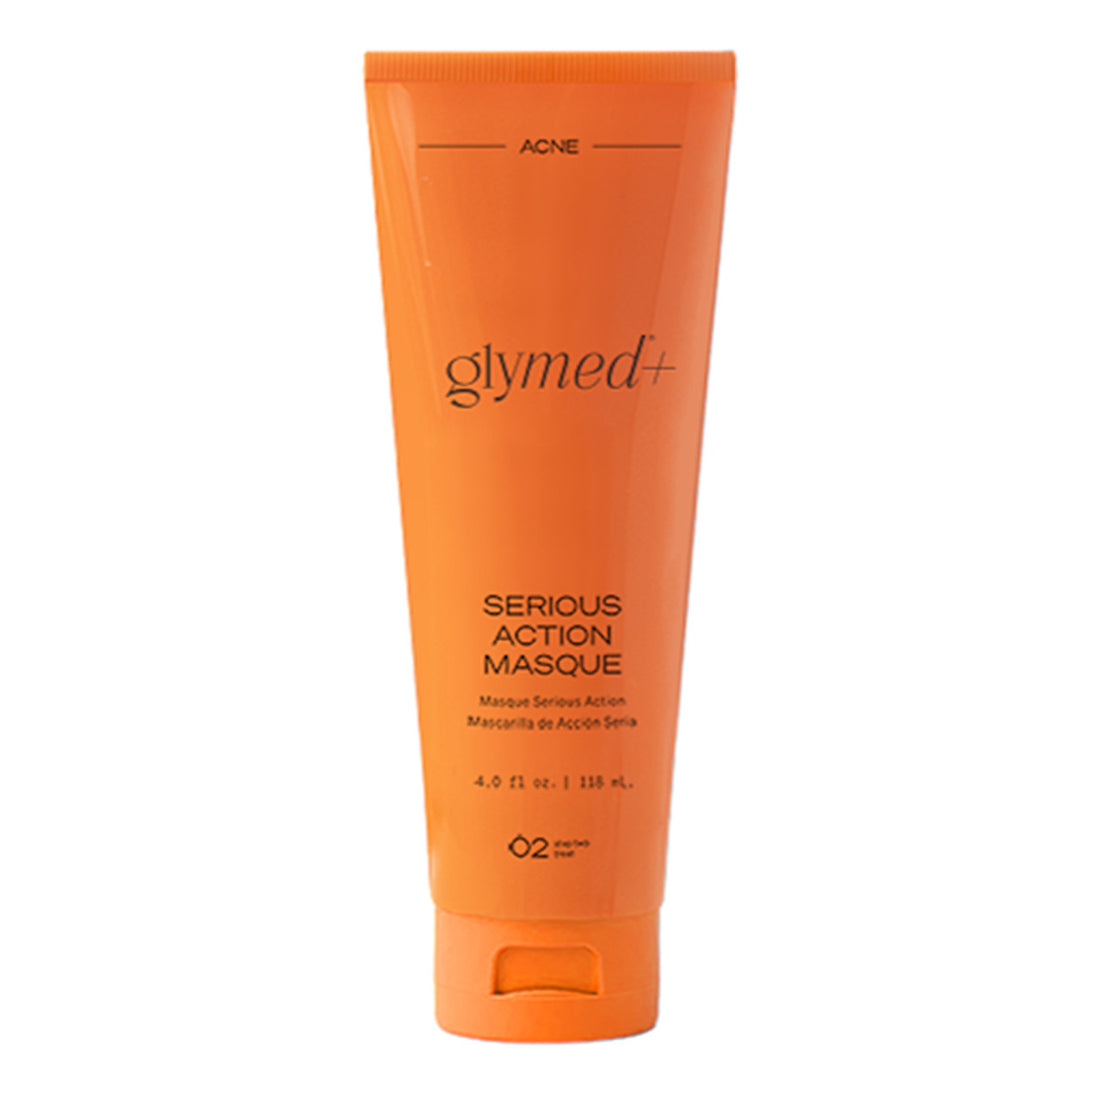 Glymed+Serious Action Masque